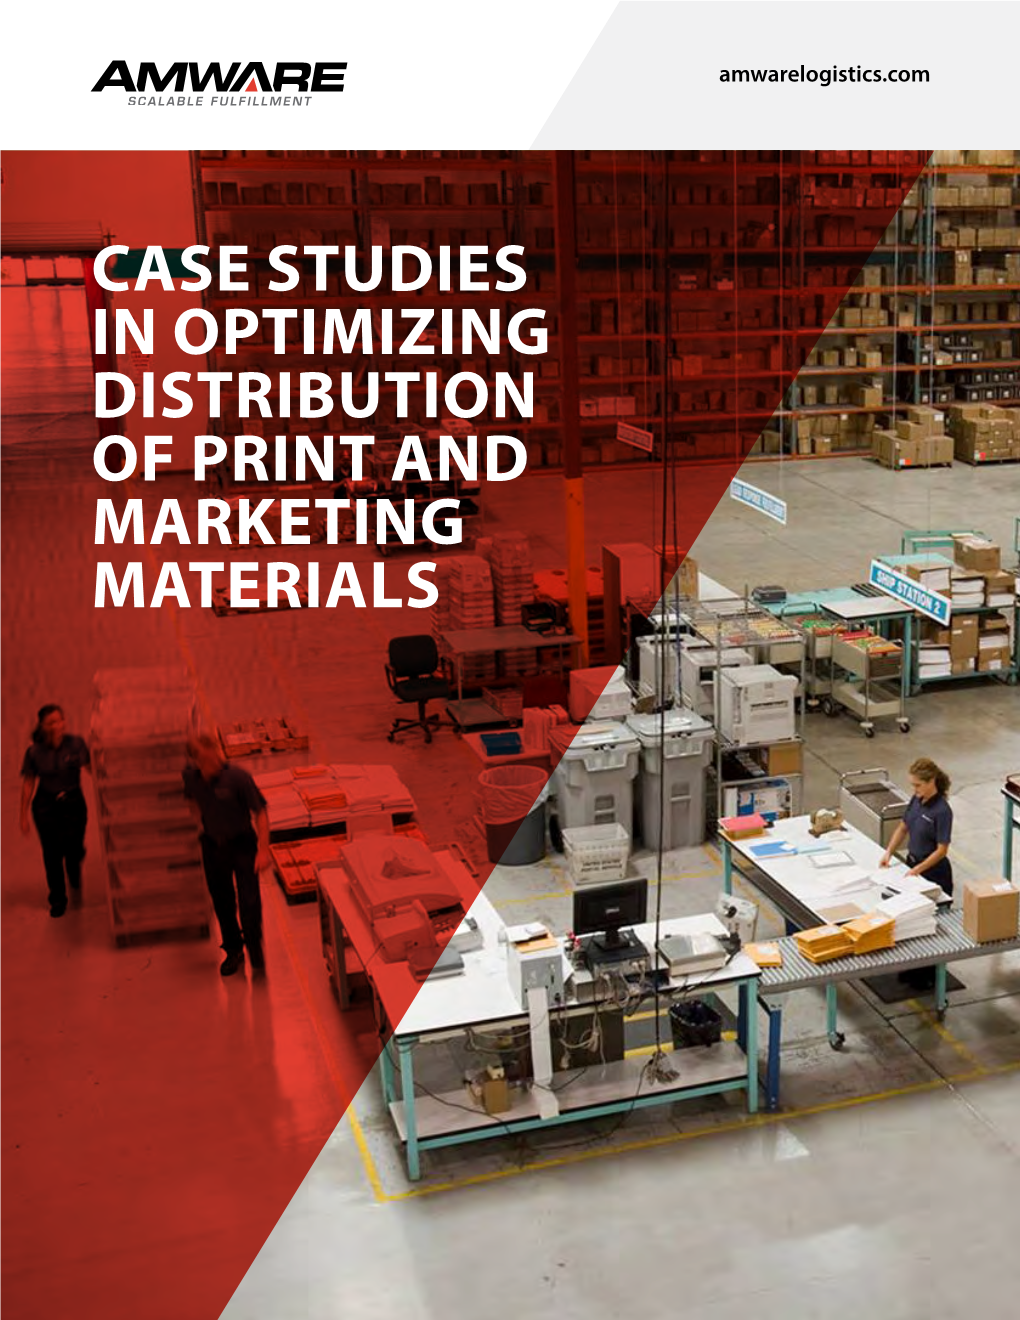 Optimizing Distribution of Print and Marketing Materials Introduction